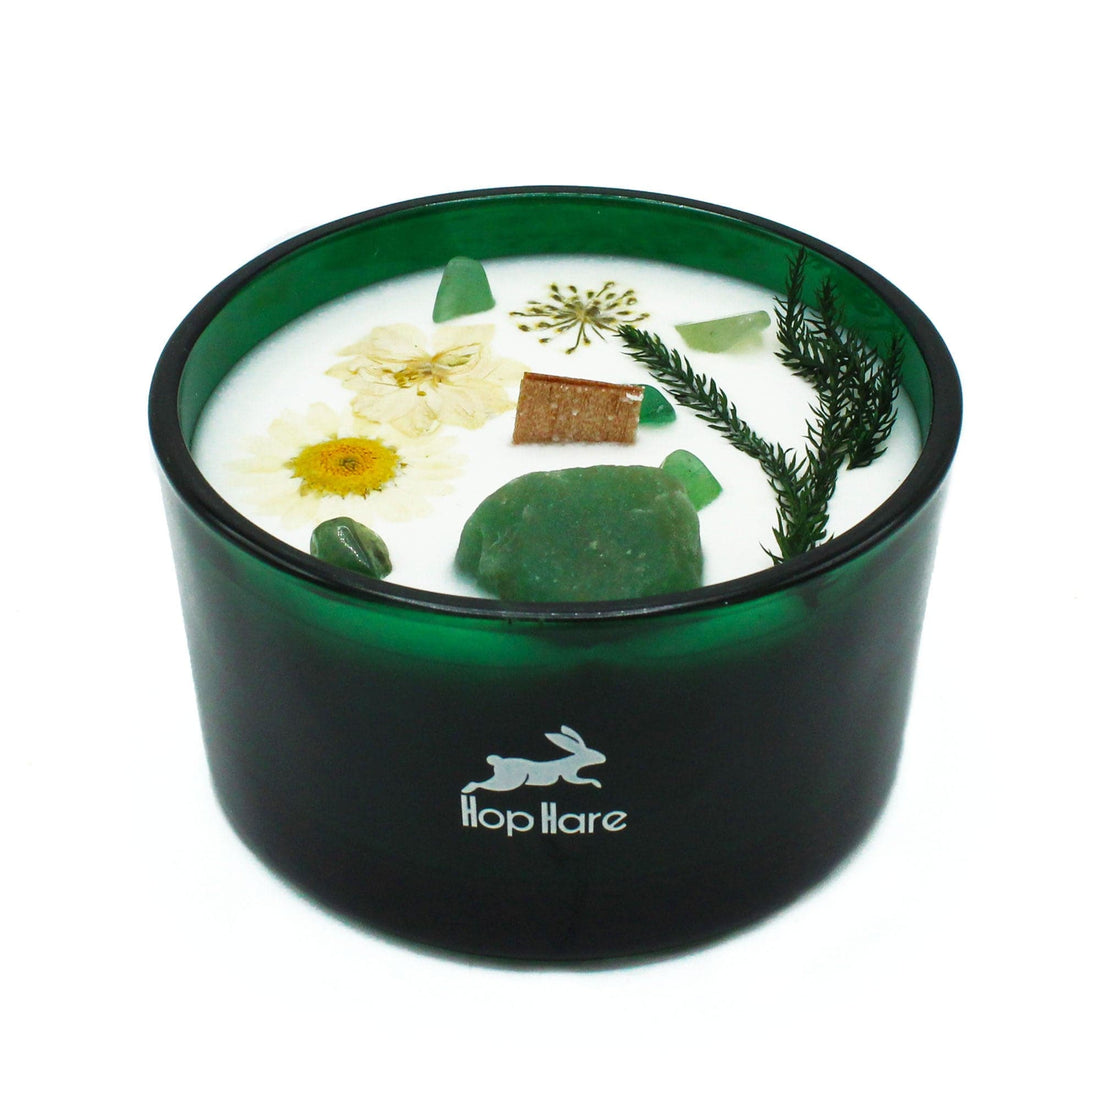 Hop Hare Crystal Magic Flower Candle - The Magician - best price from Maltashopper.com HHC-02